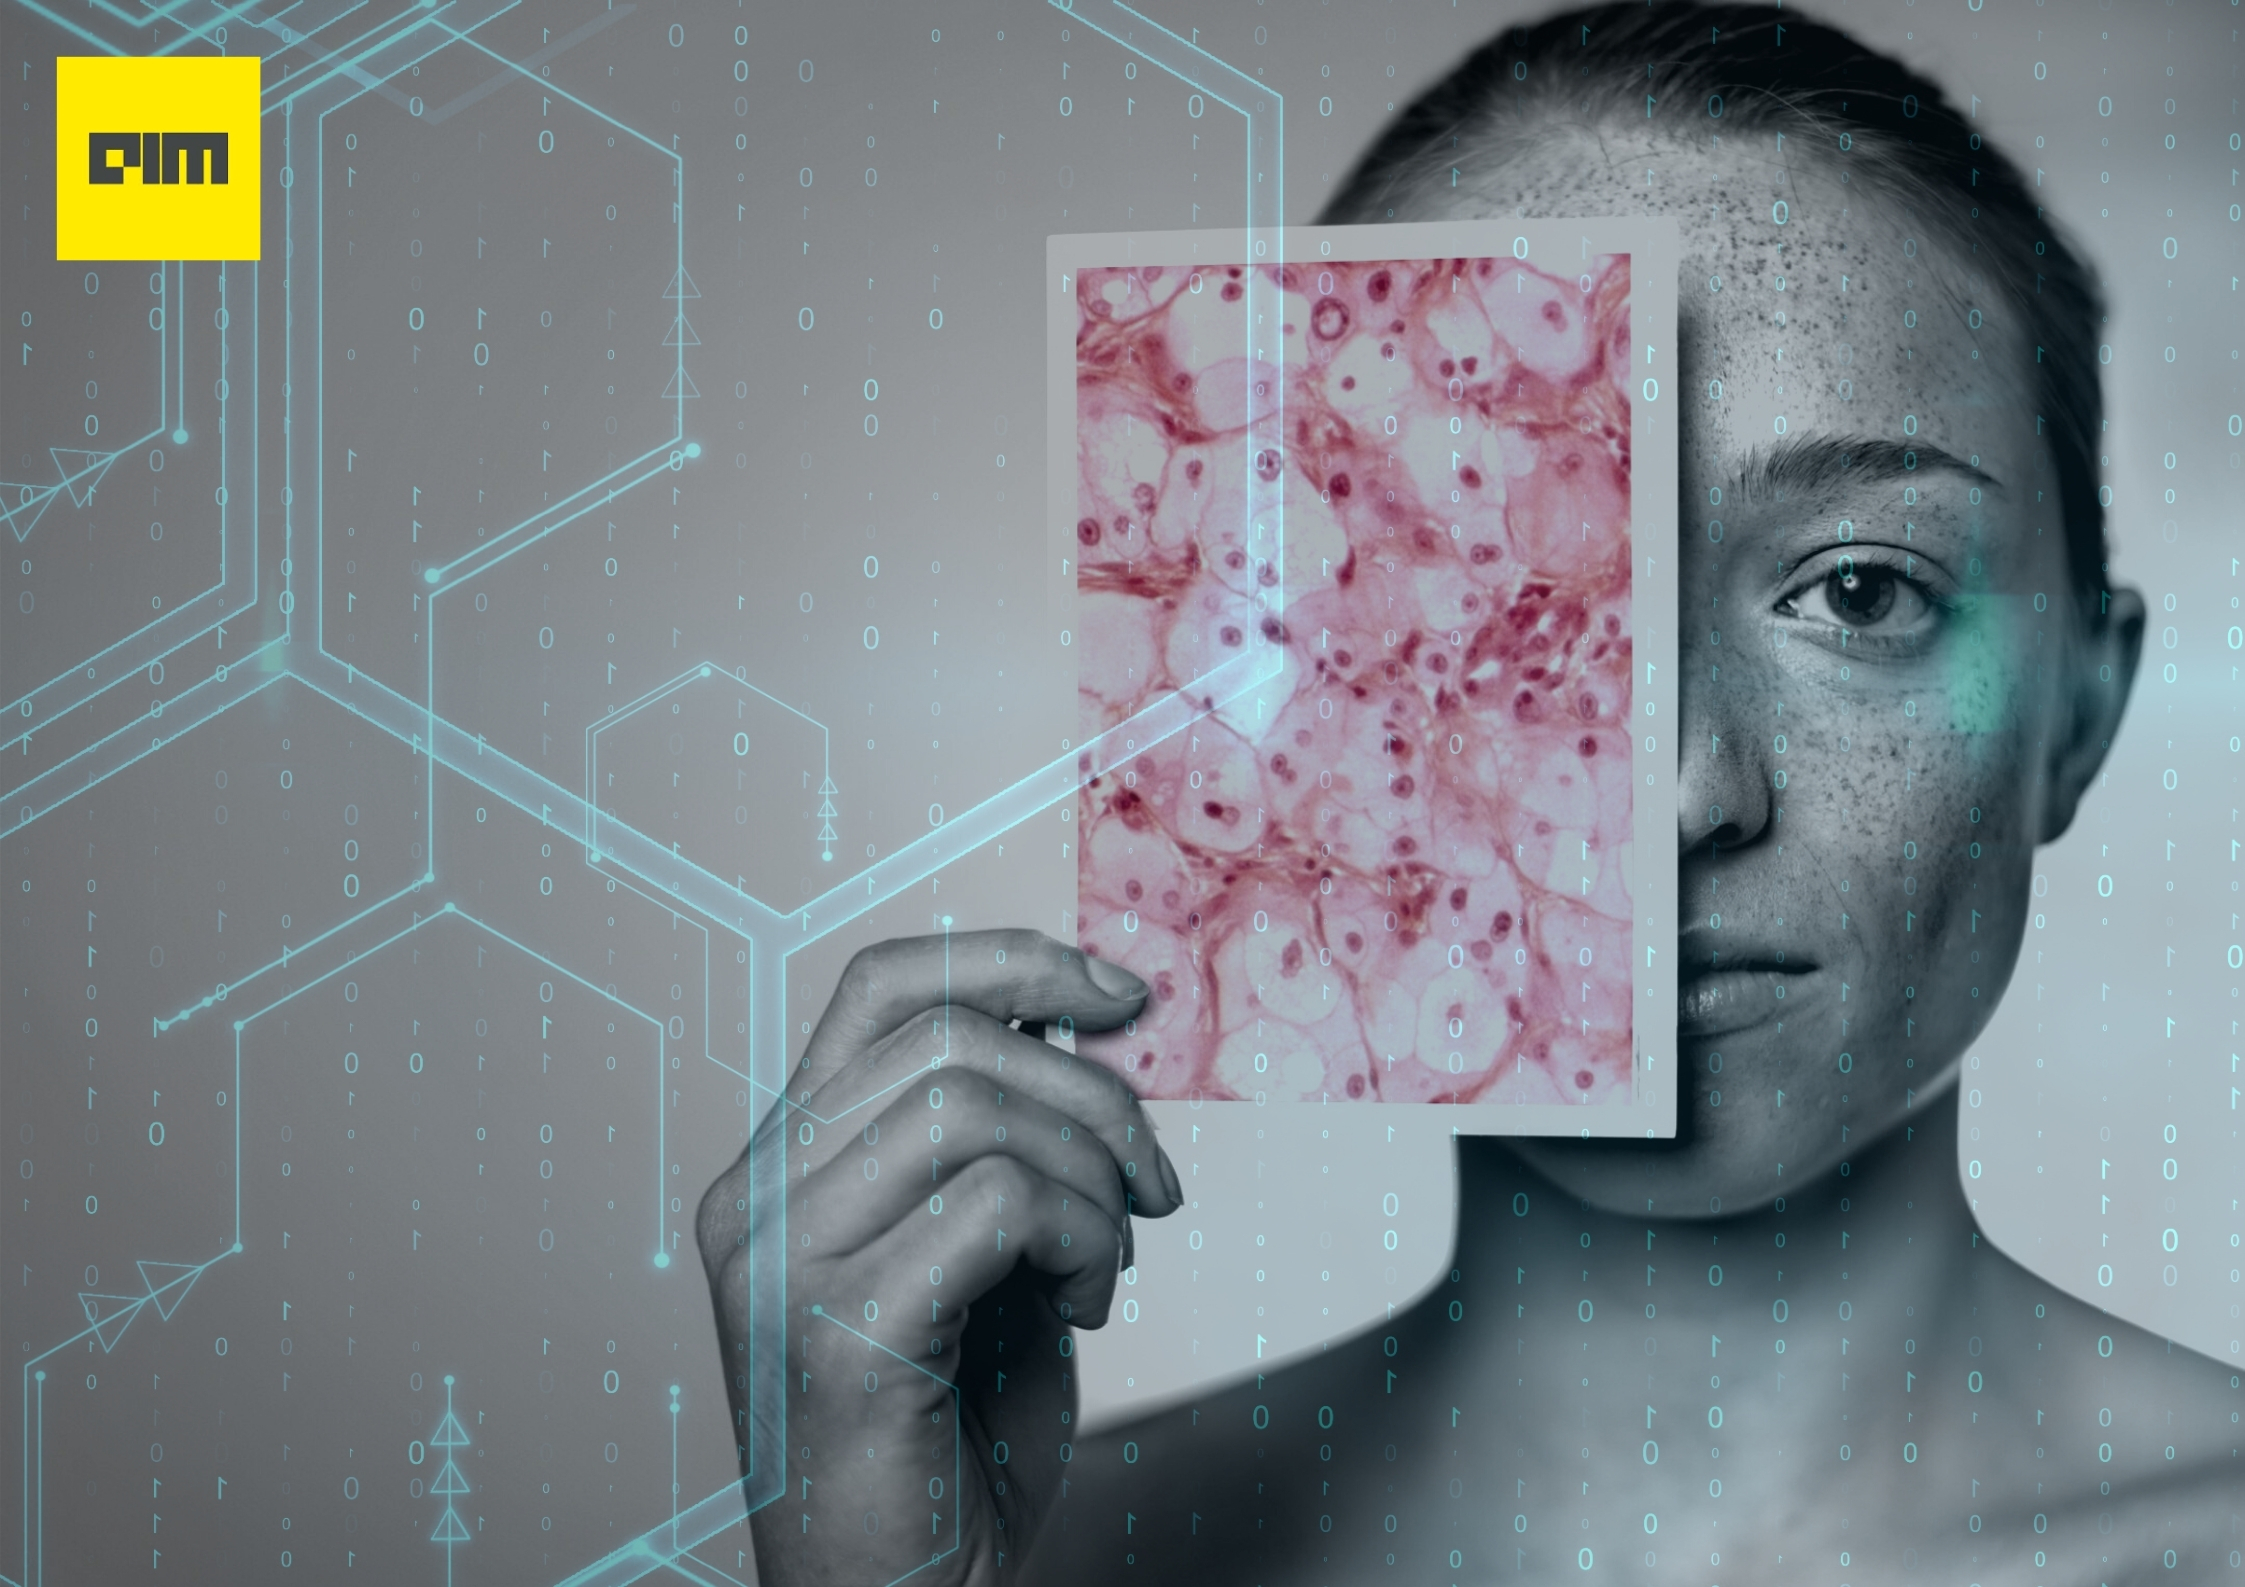 MIT Researchers Develop An AI Tool To Detect Skin Cancer